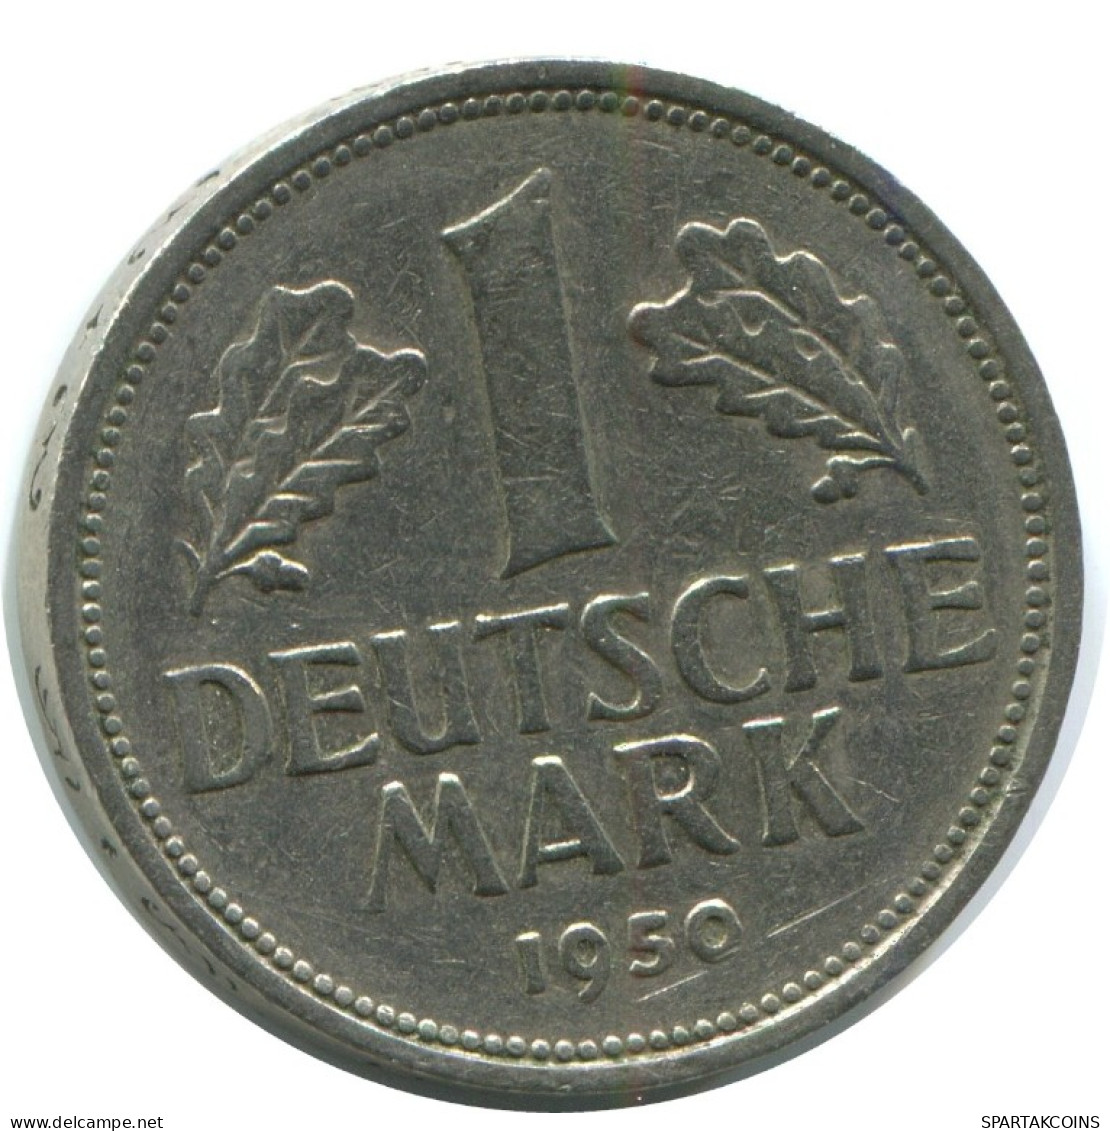 1 DM 1950 F WEST & UNIFIED GERMANY Coin #AG302.3.U.A - 1 Mark